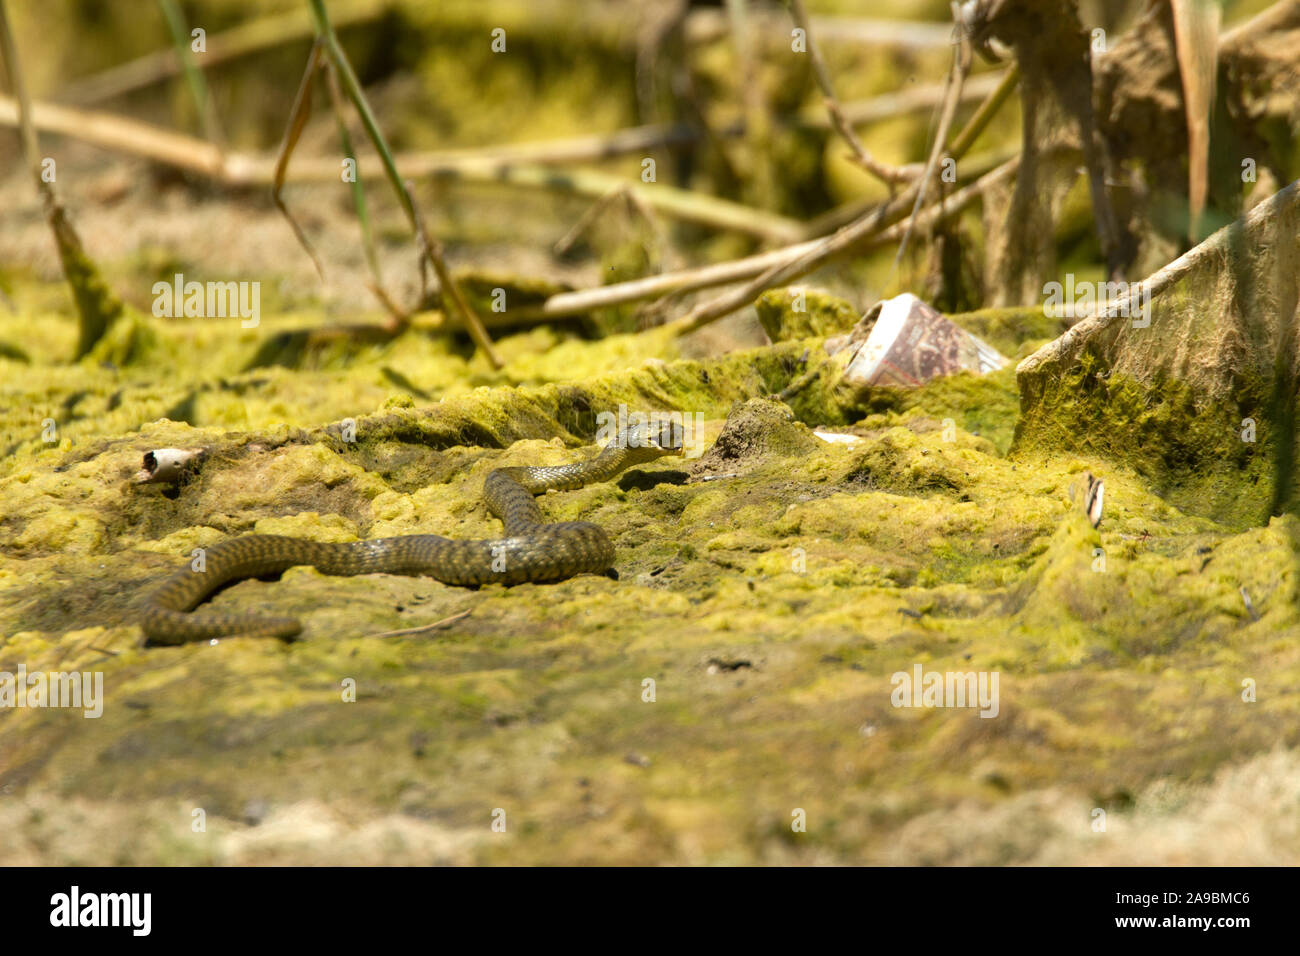 DICE SNAKE Natrix tessellata FISHING IN DRYING UP RIVER BED IN CRETE.  HOT WEATHER IS KILLING SOME OF THE REMAINING FISH. Stock Photo